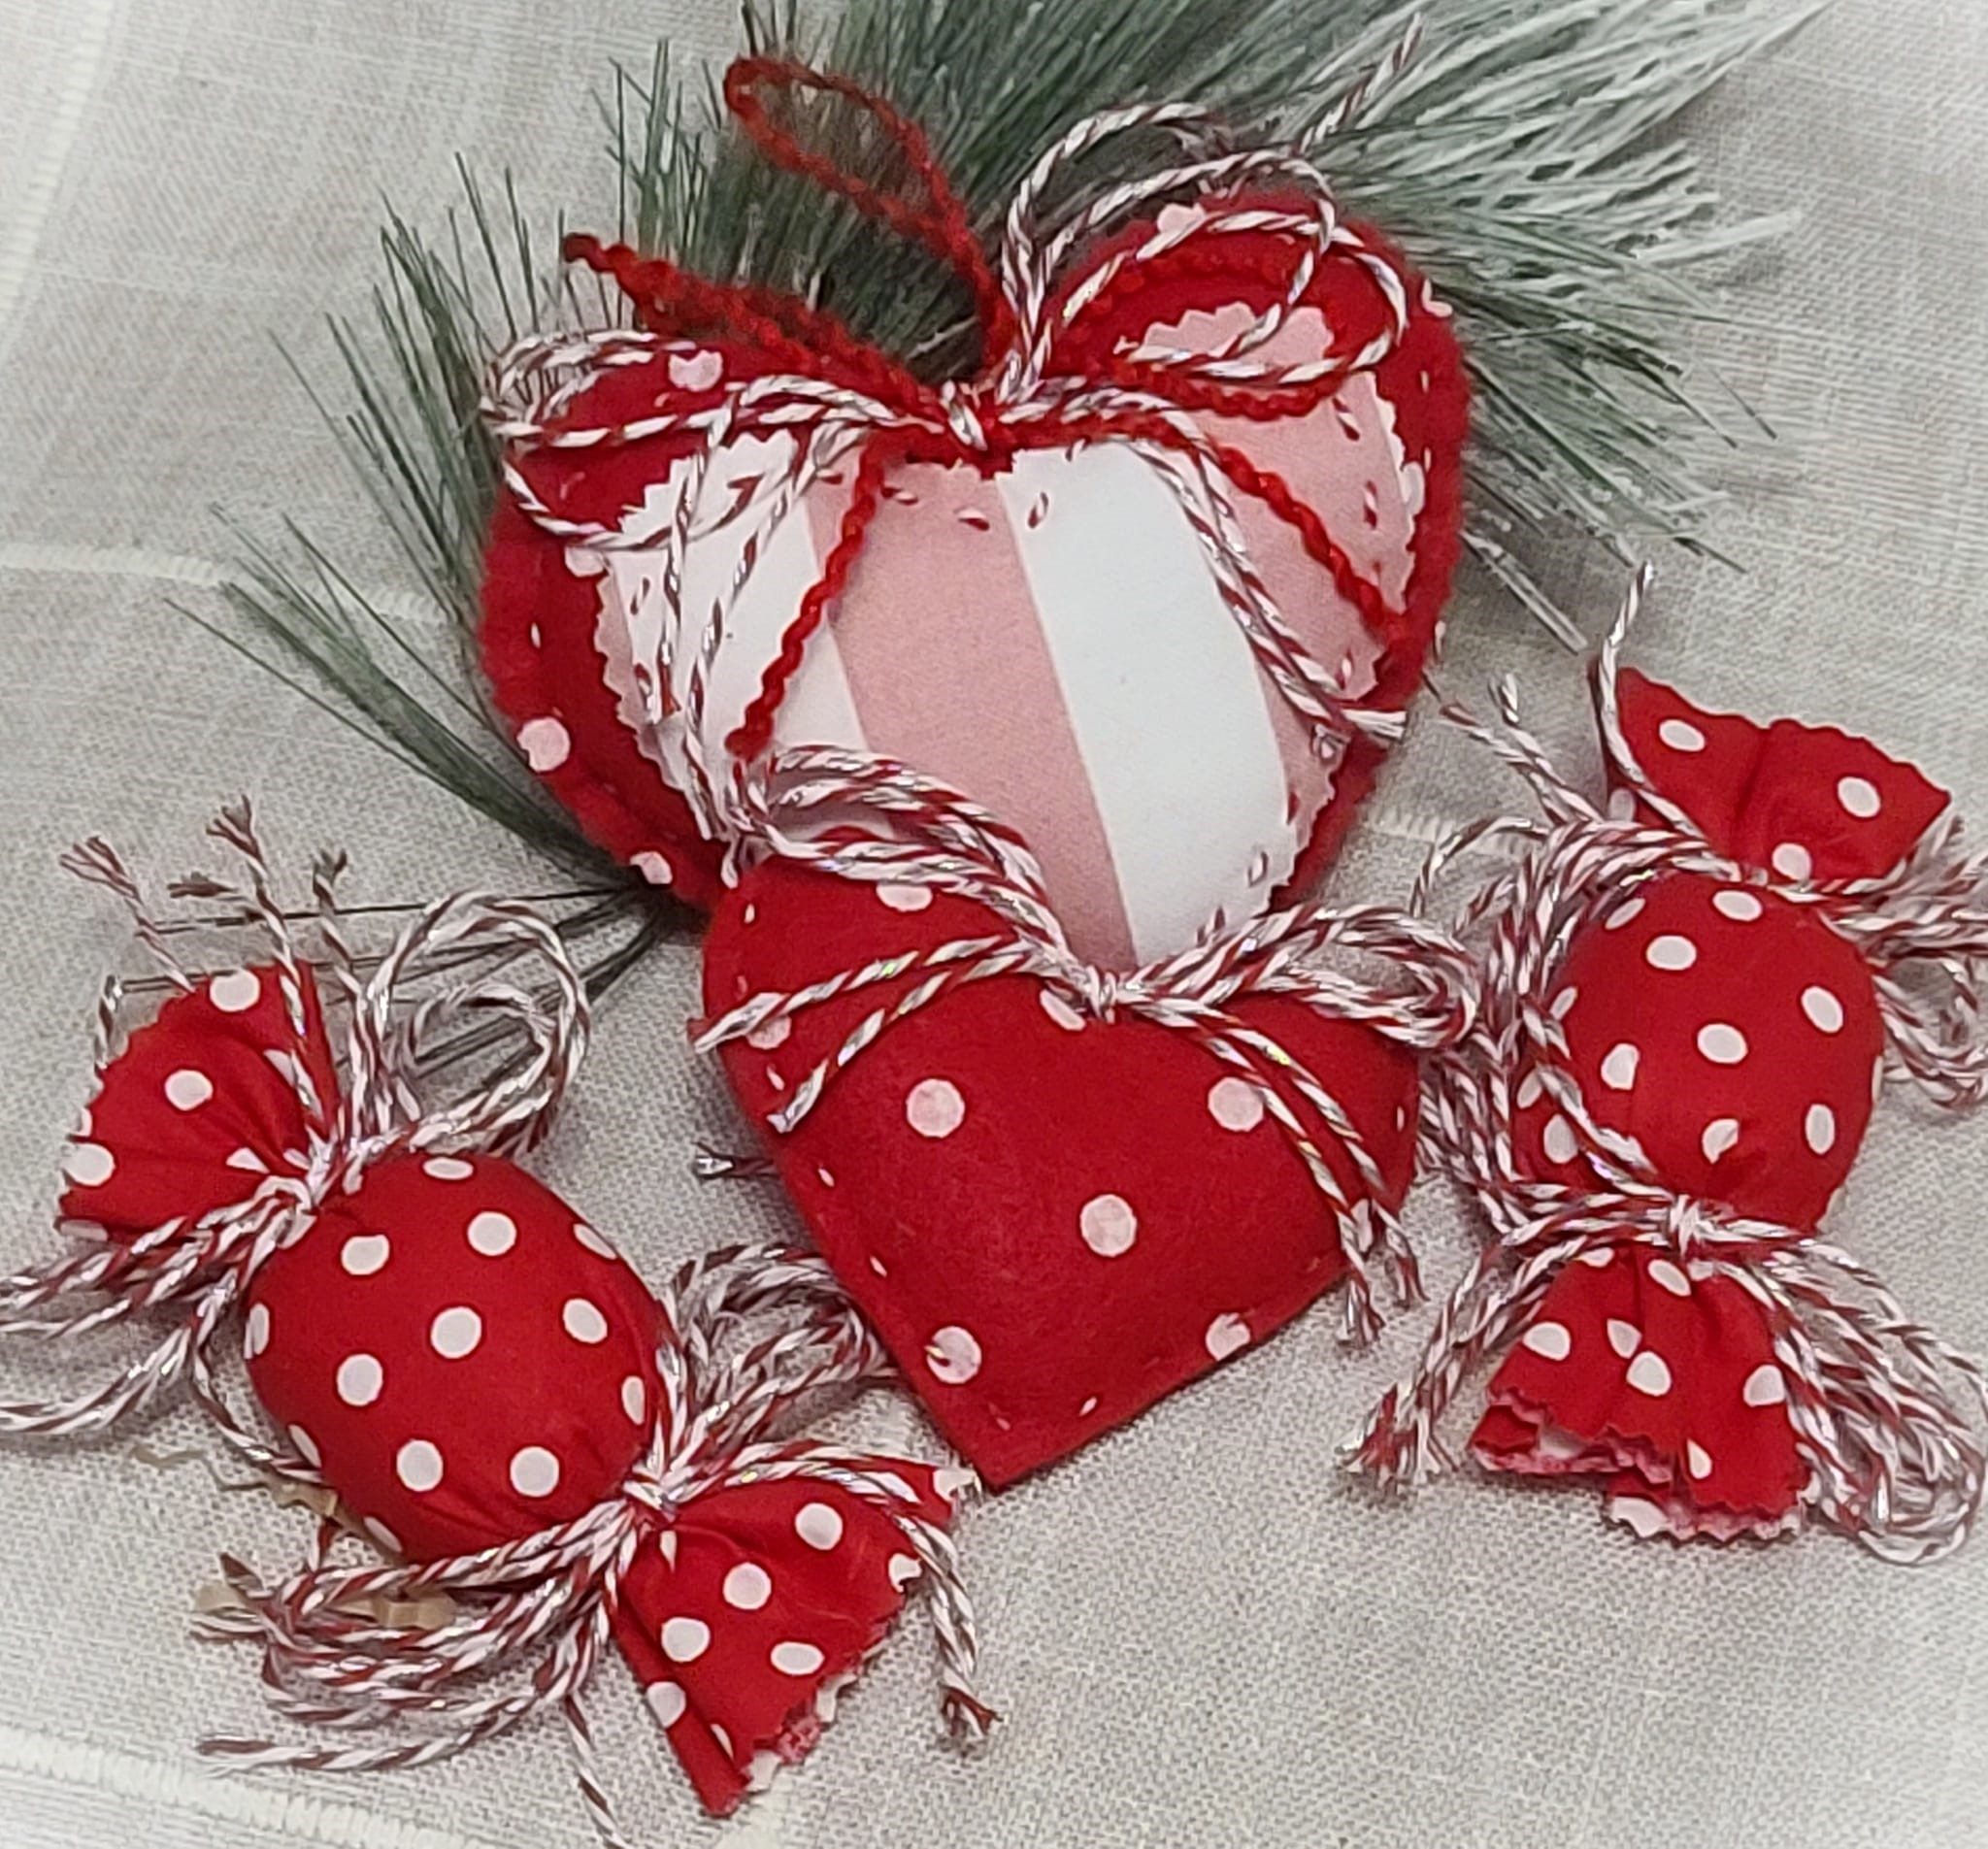 Bowl filler candy ornaments set of 4 Hearts and candy shapes